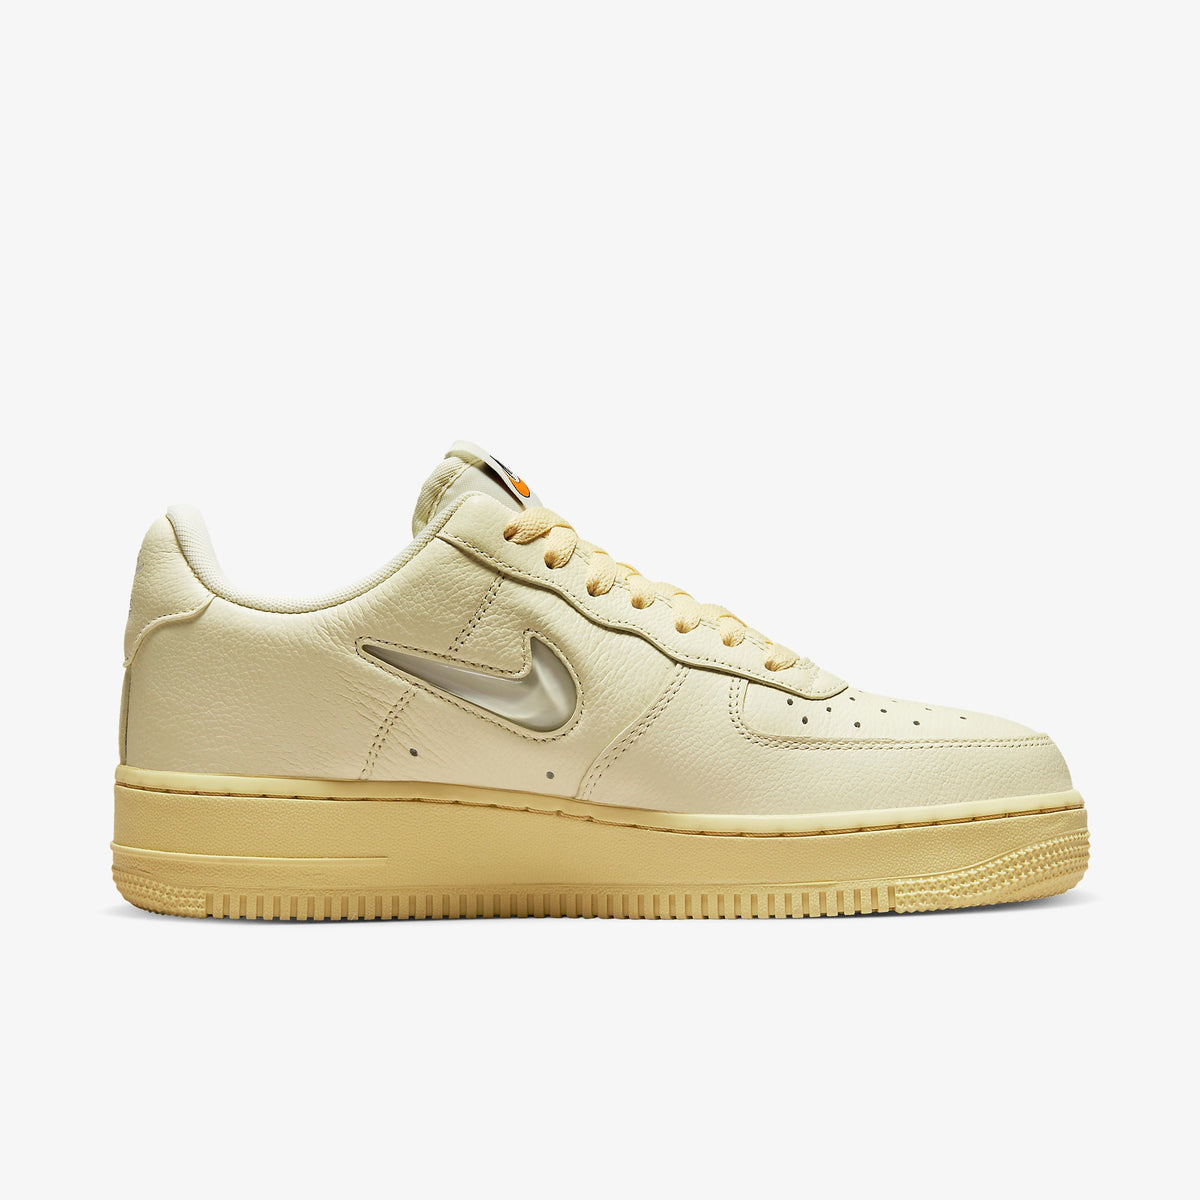 Nike Air Force 1 Low 07 LX Womens 